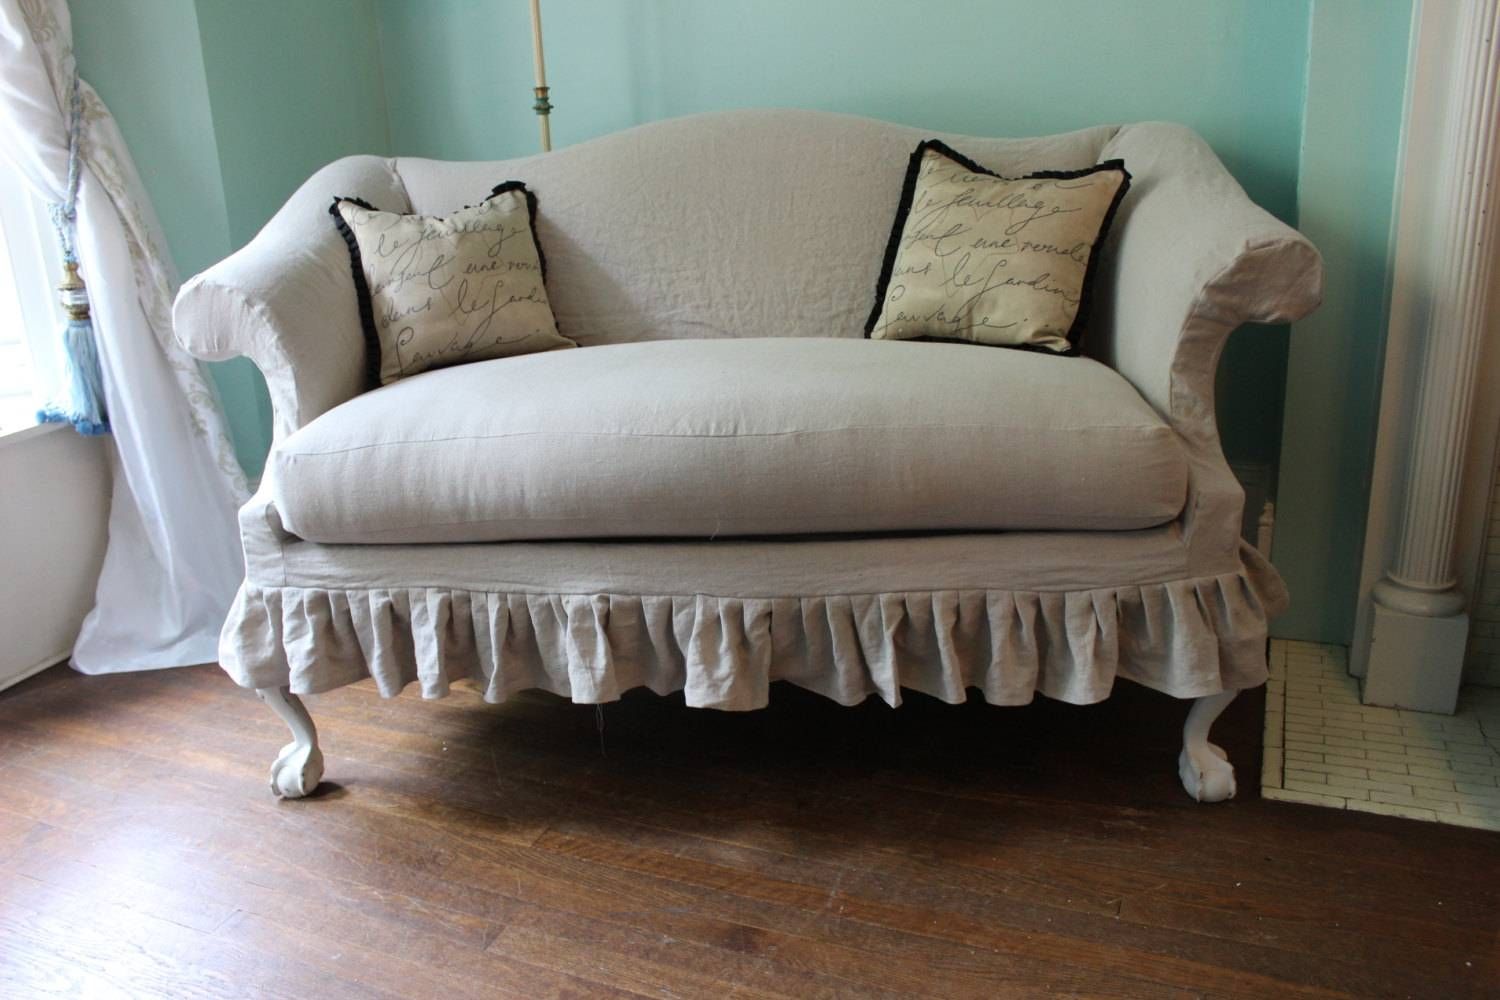 Old Reclining Loveseat Slipcover With White Color 2 Cushions And Regarding Camelback Slipcovers (View 3 of 15)